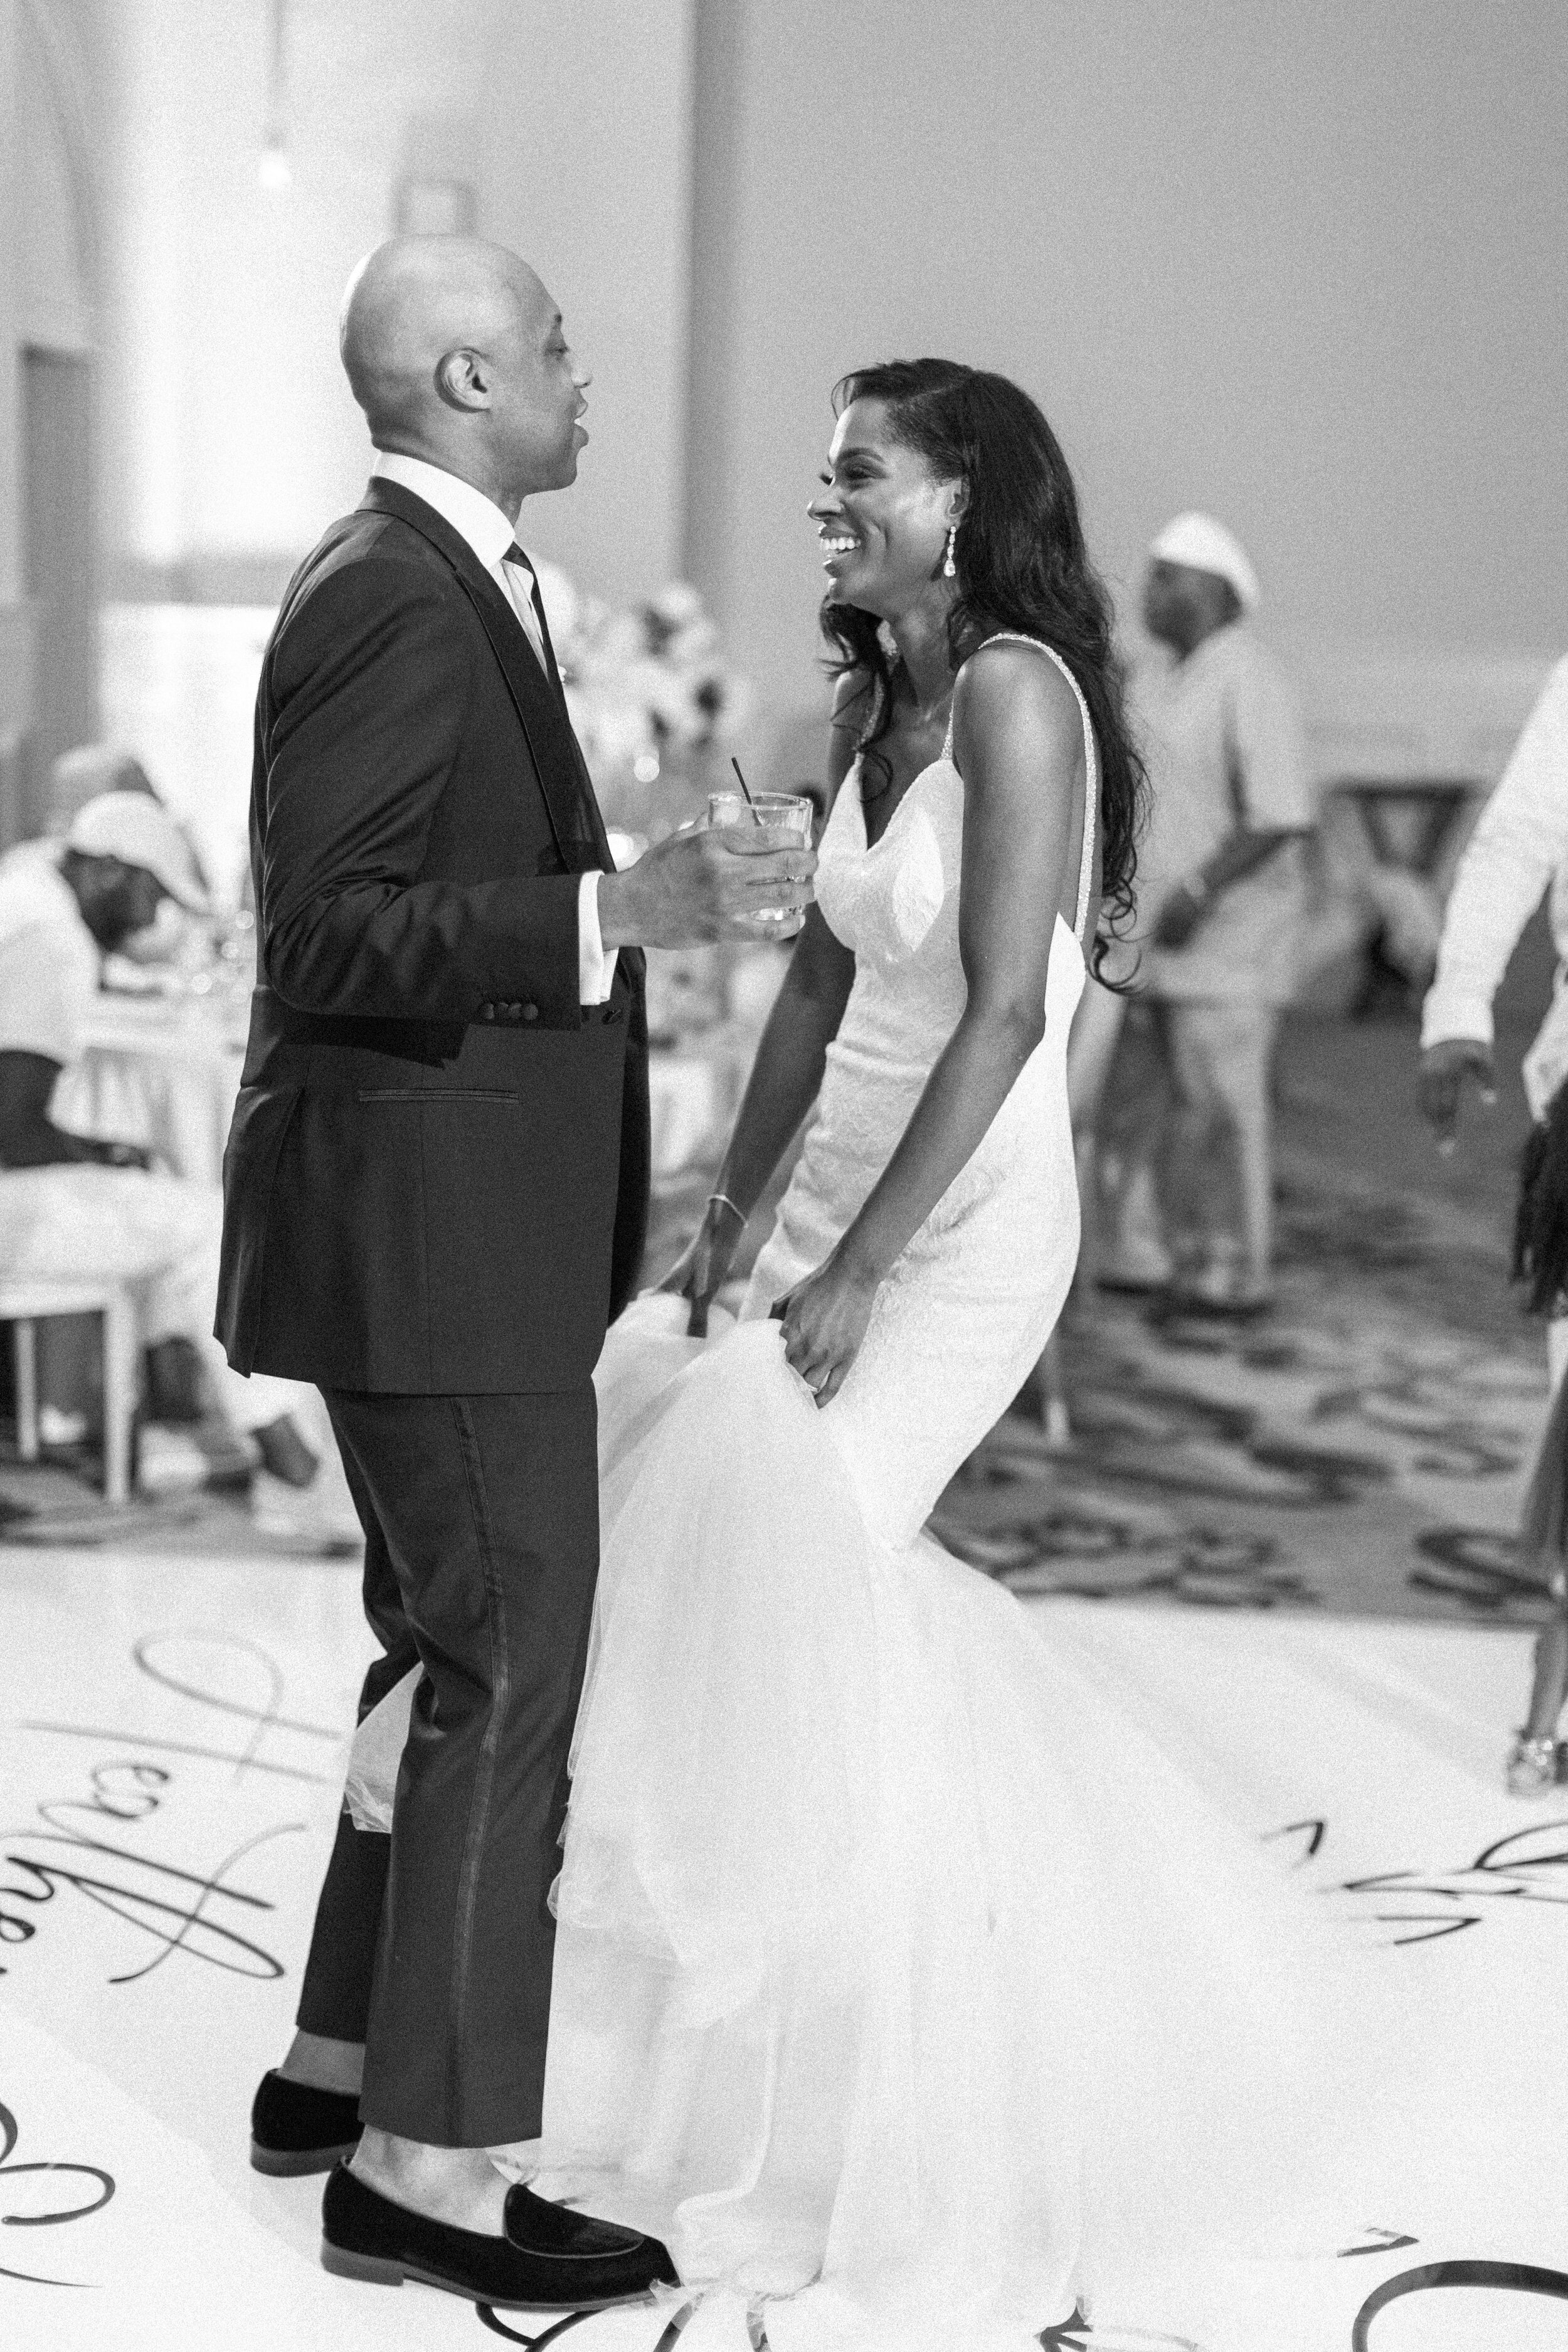  A lovely bride and groom enjoy a dance together at their wedding. Pictures on the dance floor wedding photography unique wedding photo ideas mermaid wedding dress bride and groom picture ideas DFW wedding photographer elegant wedding high end dallas